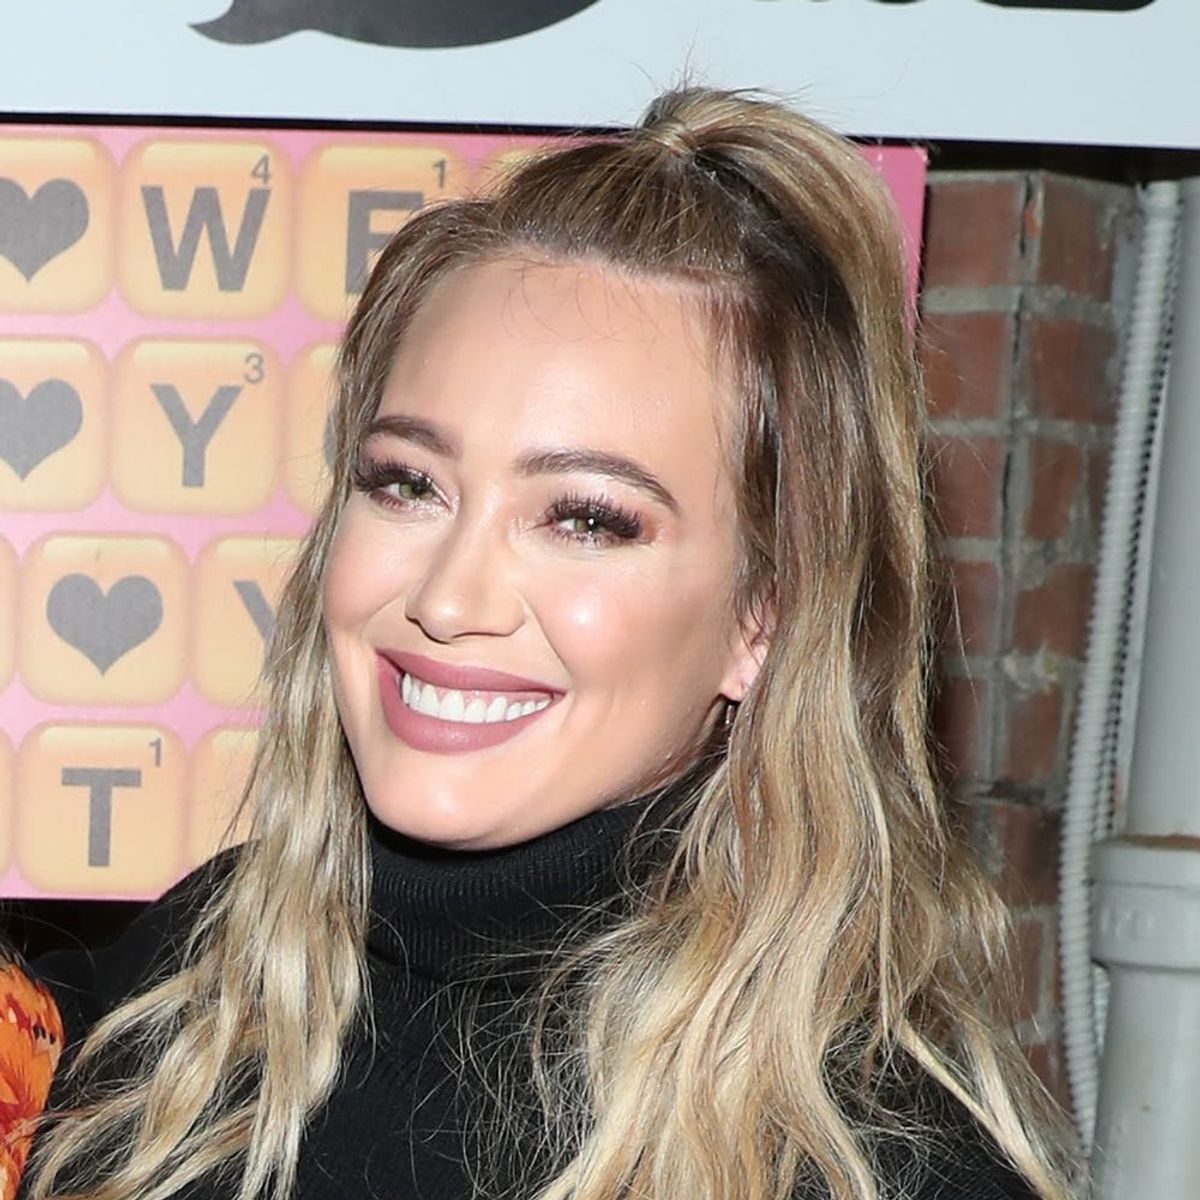 This Is the One Thing That Gets Hilary Duff Majorly Stressed Out About Christmas